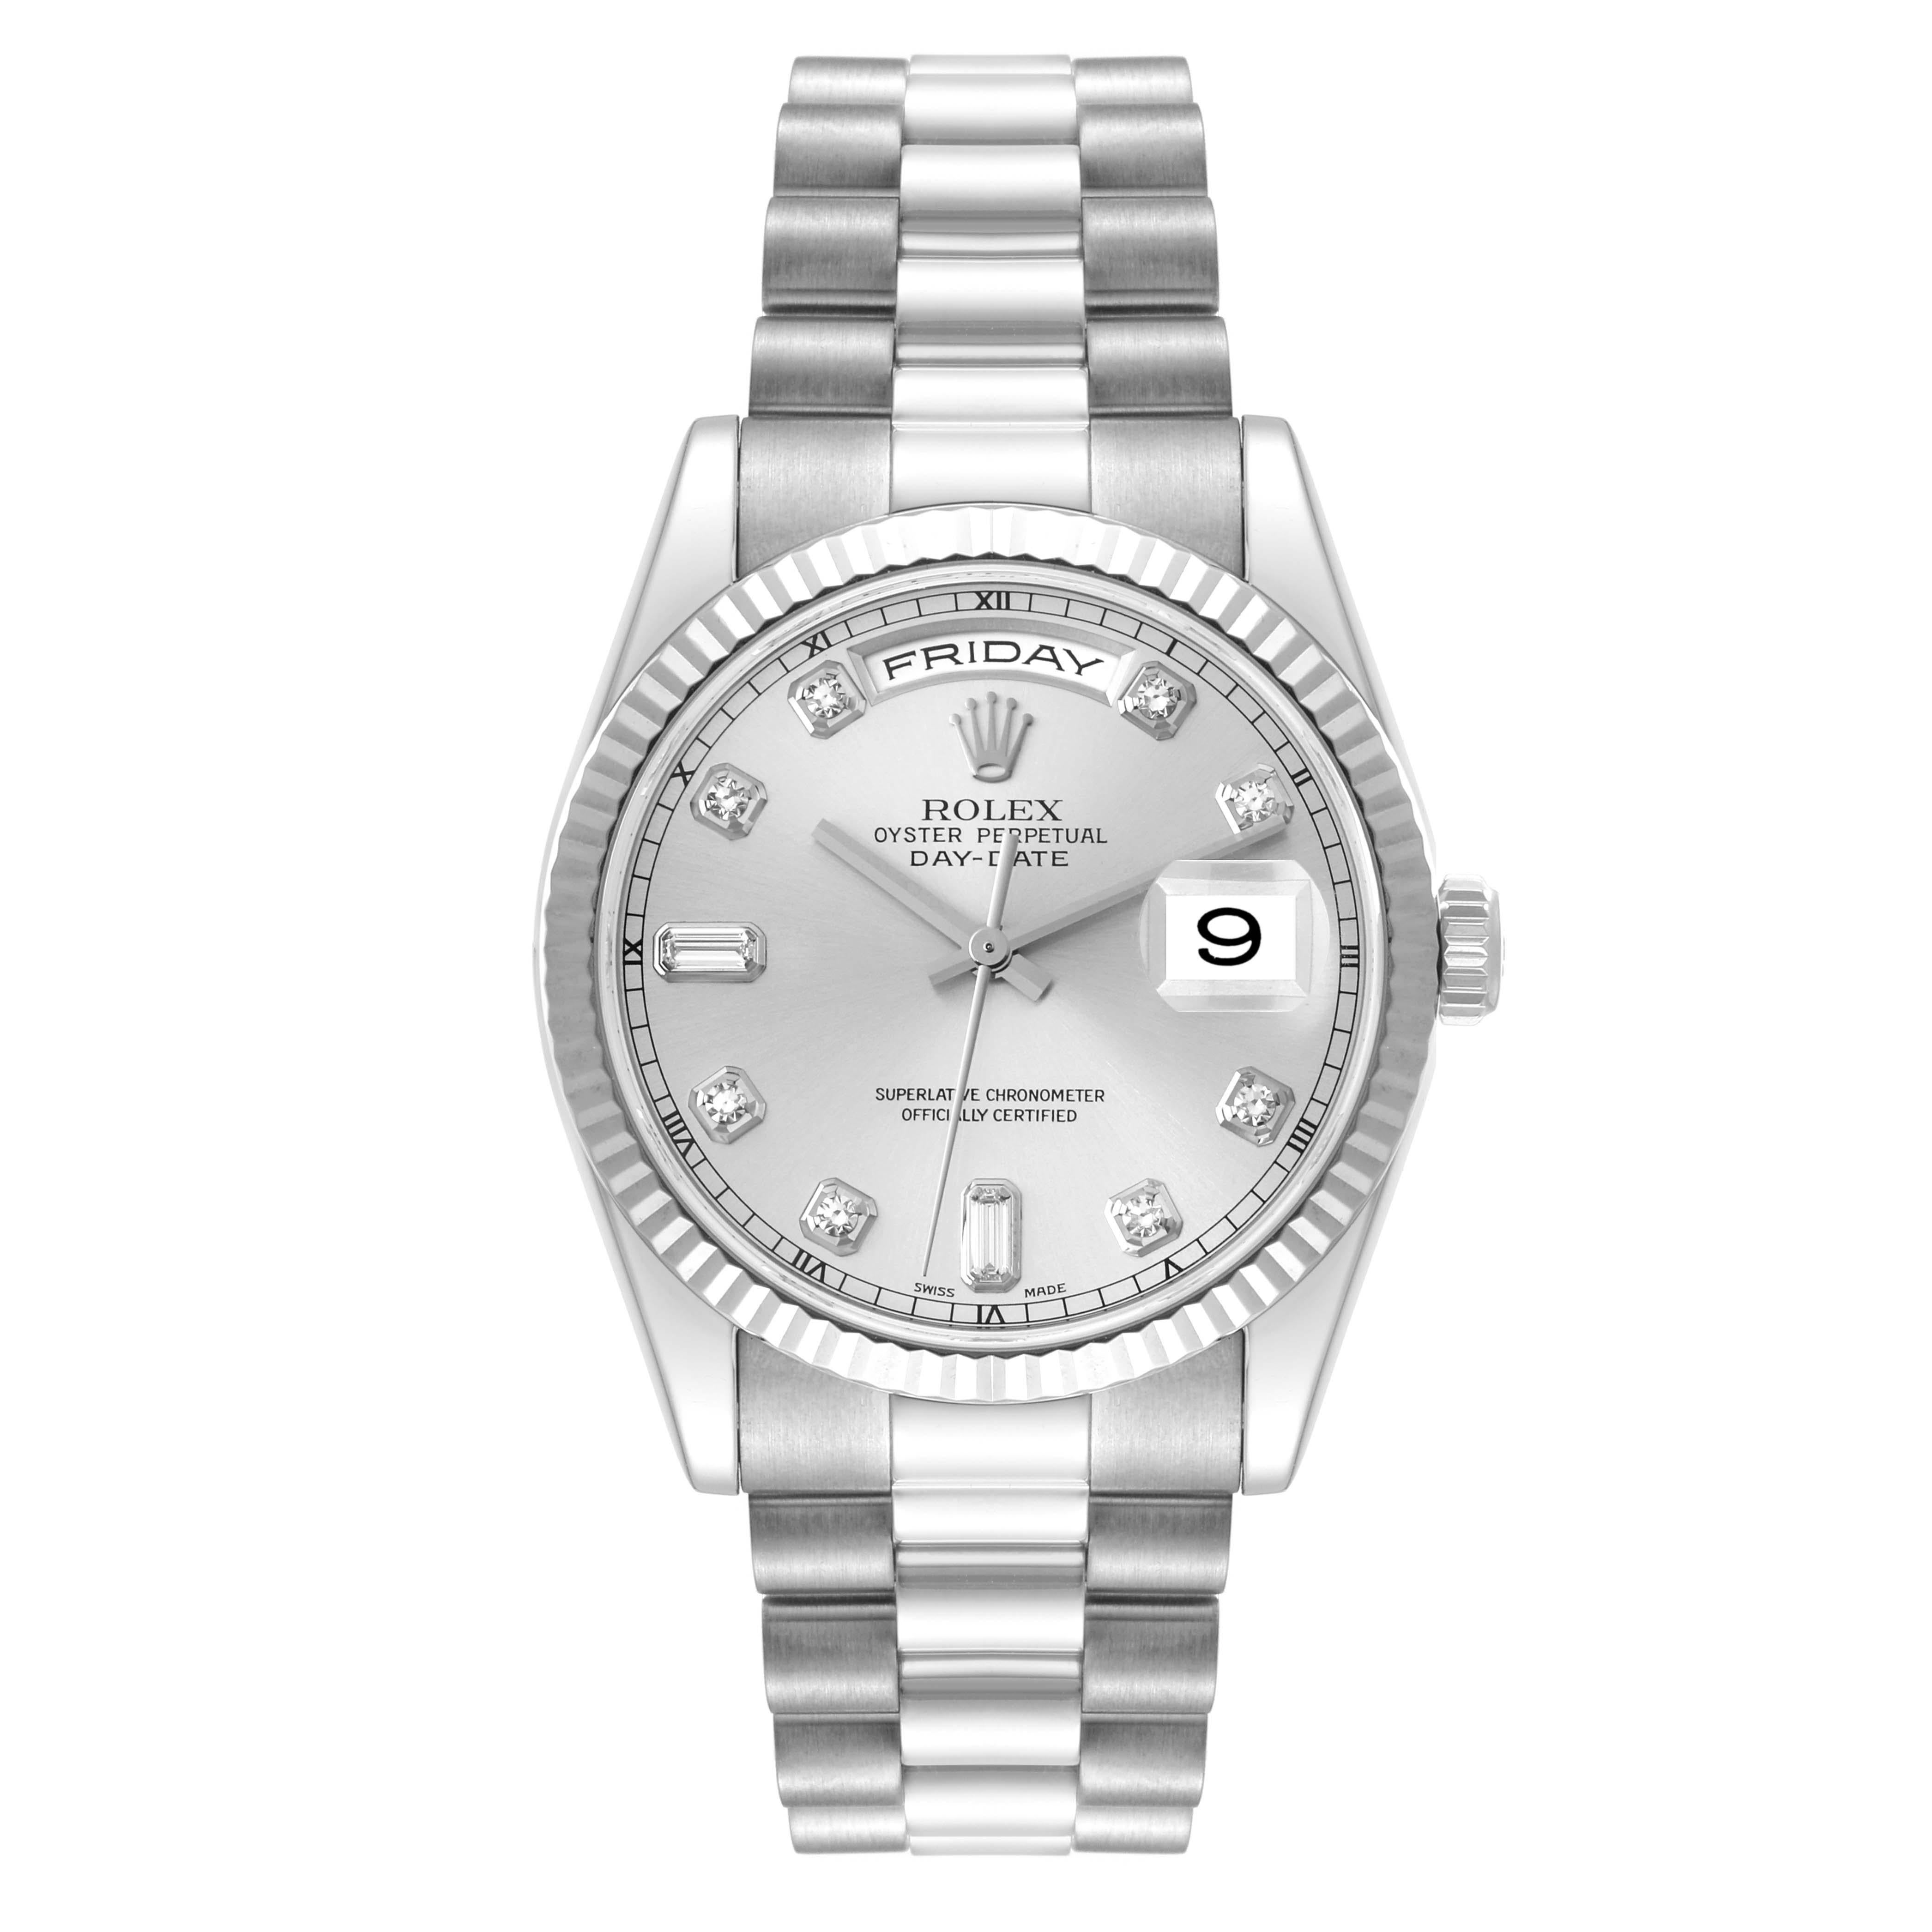 Rolex President Day-Date White Gold Diamond Dial Mens Watch 118239. Officially certified chronometer self-winding movement. 18k white gold oyster case 36.0 mm in diameter. Rolex logo on a crown. 18k white gold fluted bezel. Scratch resistant